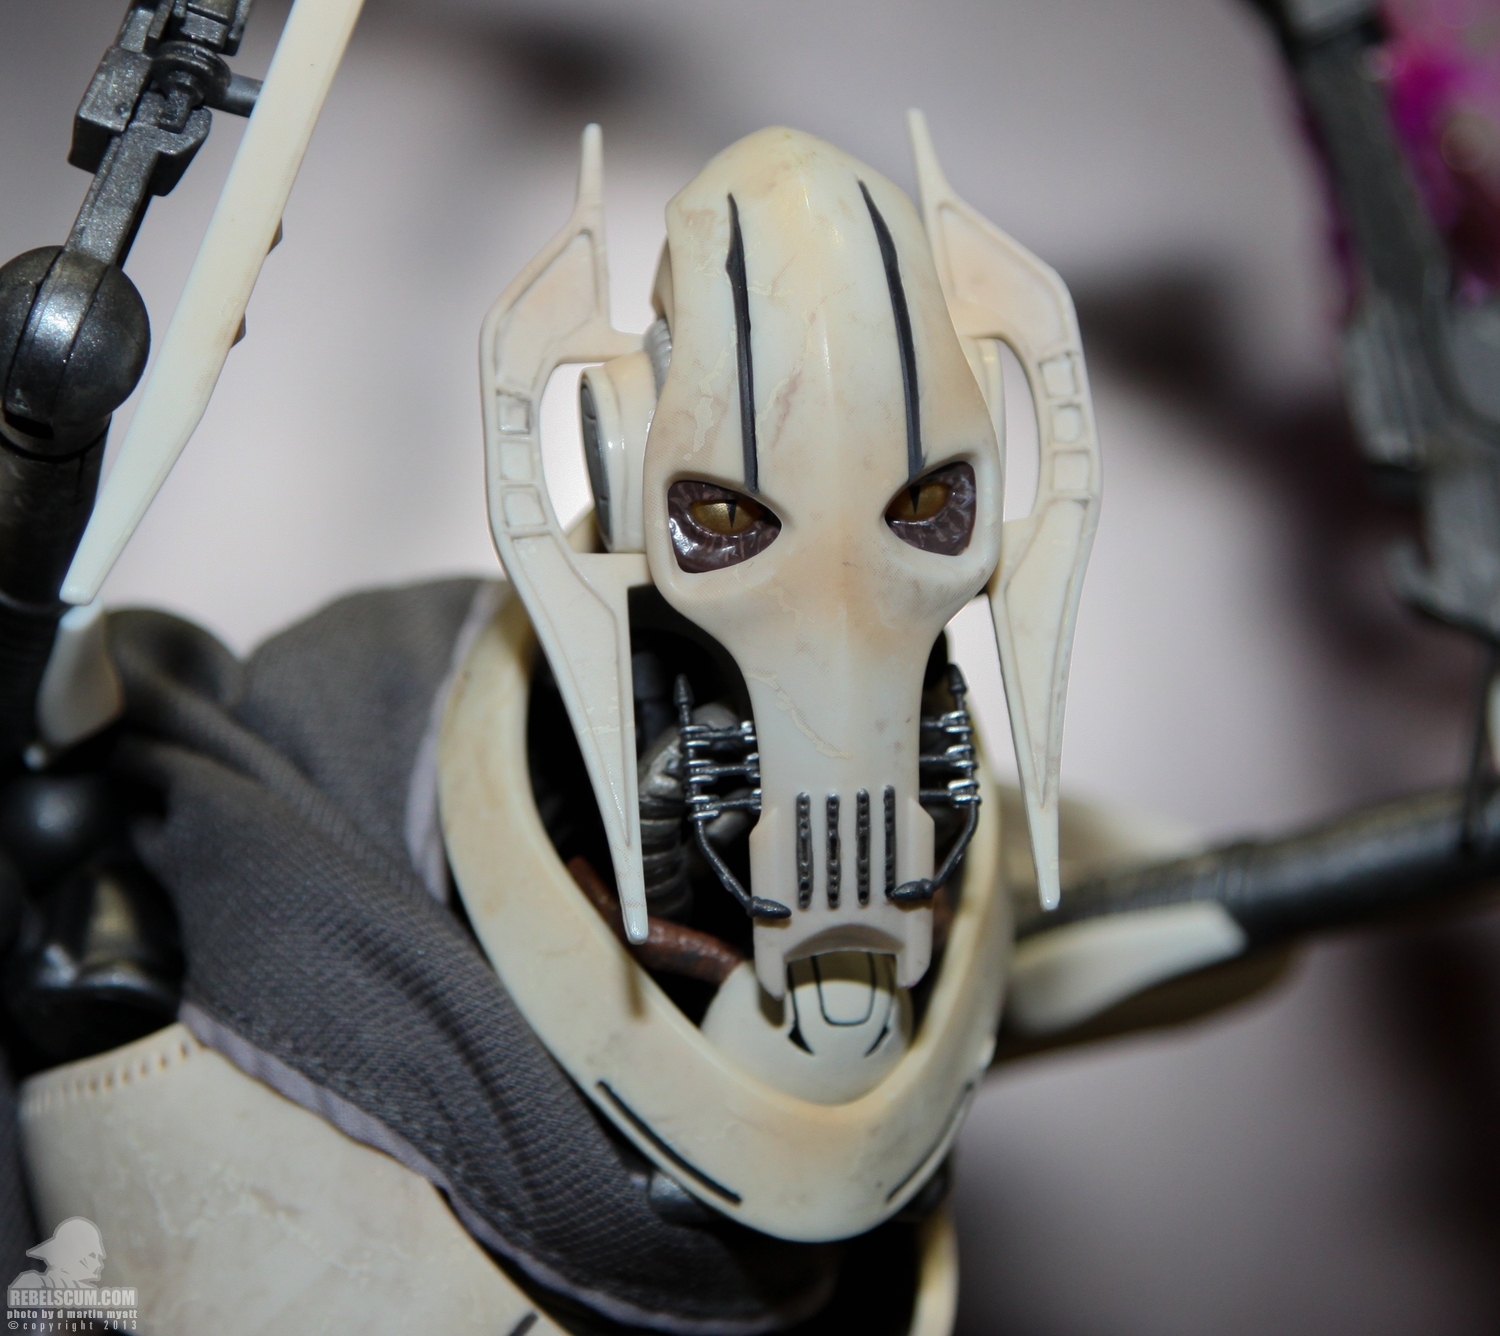 SDCC_2013_Sideshow_Collectibles_Star_Wars_Wed-032.jpg